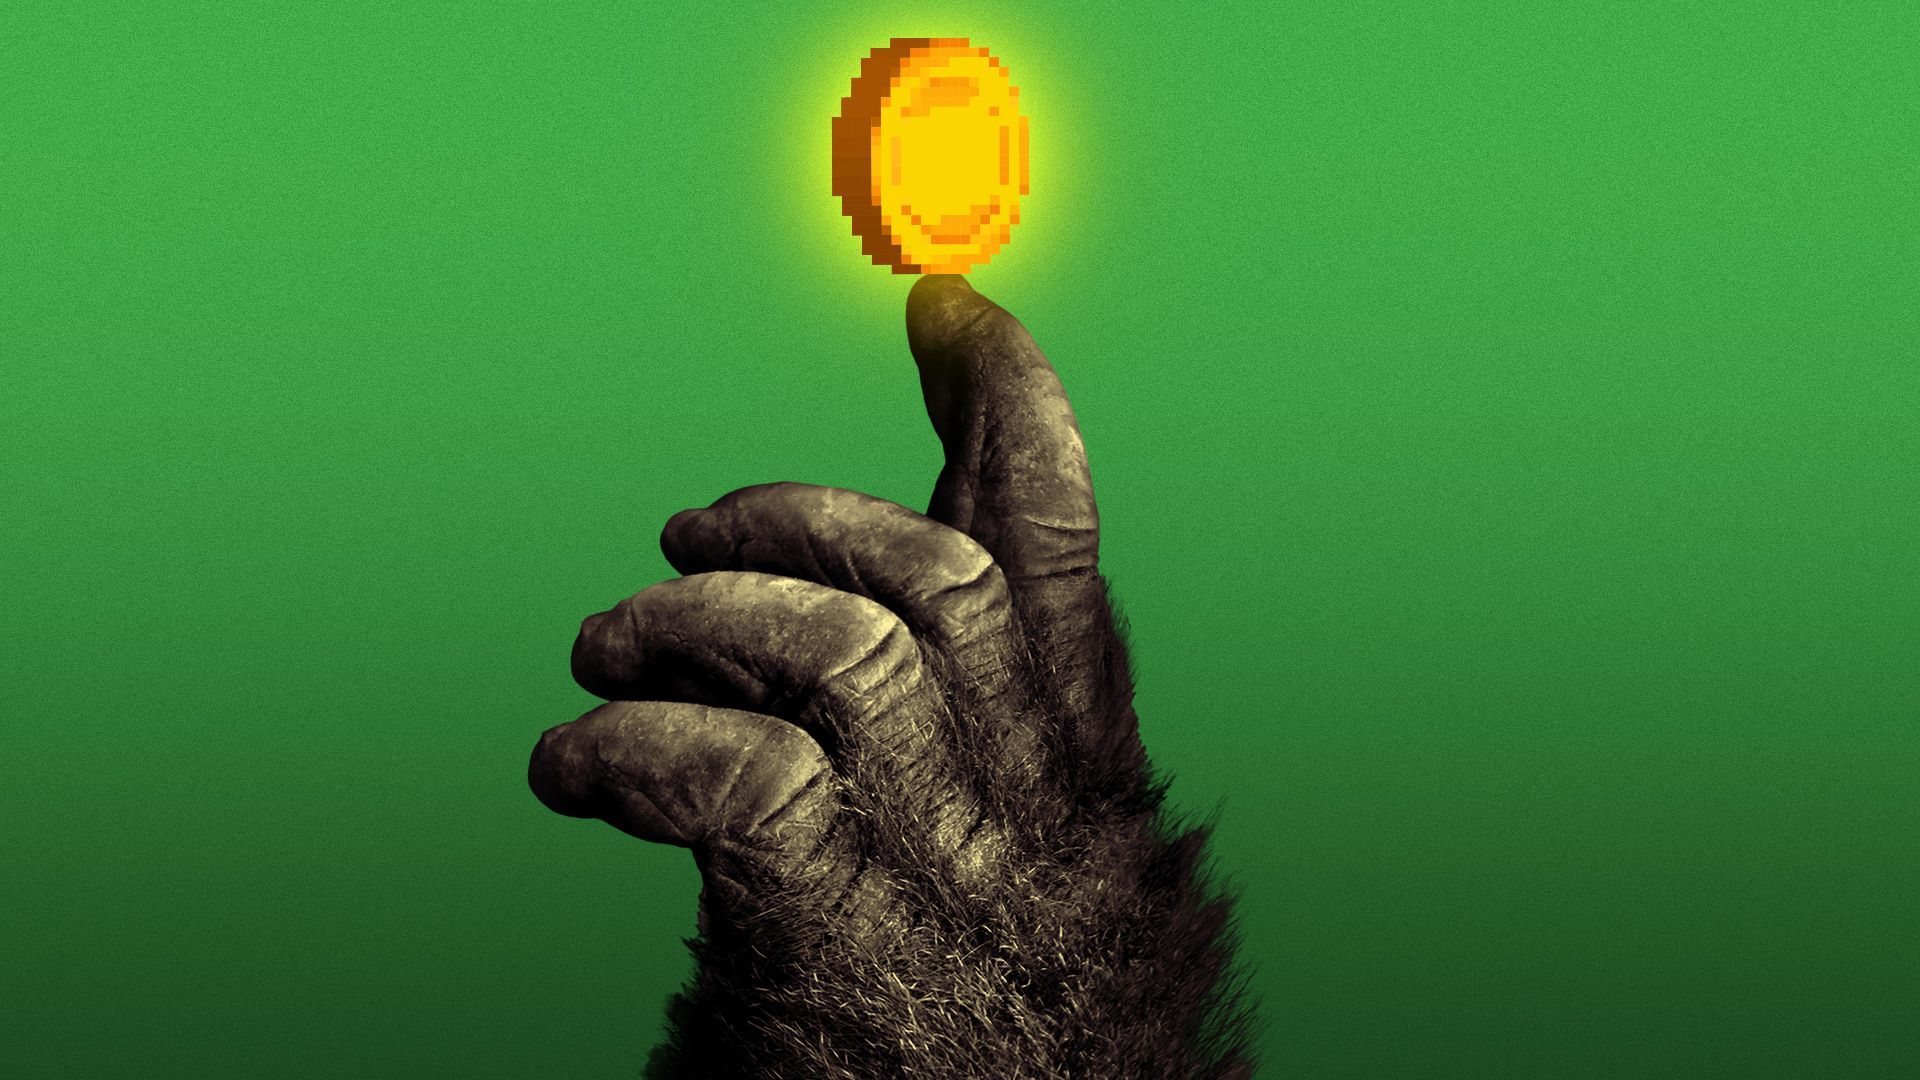 Illustration of a pixelated coin balancing on an ape's outstretched finger.